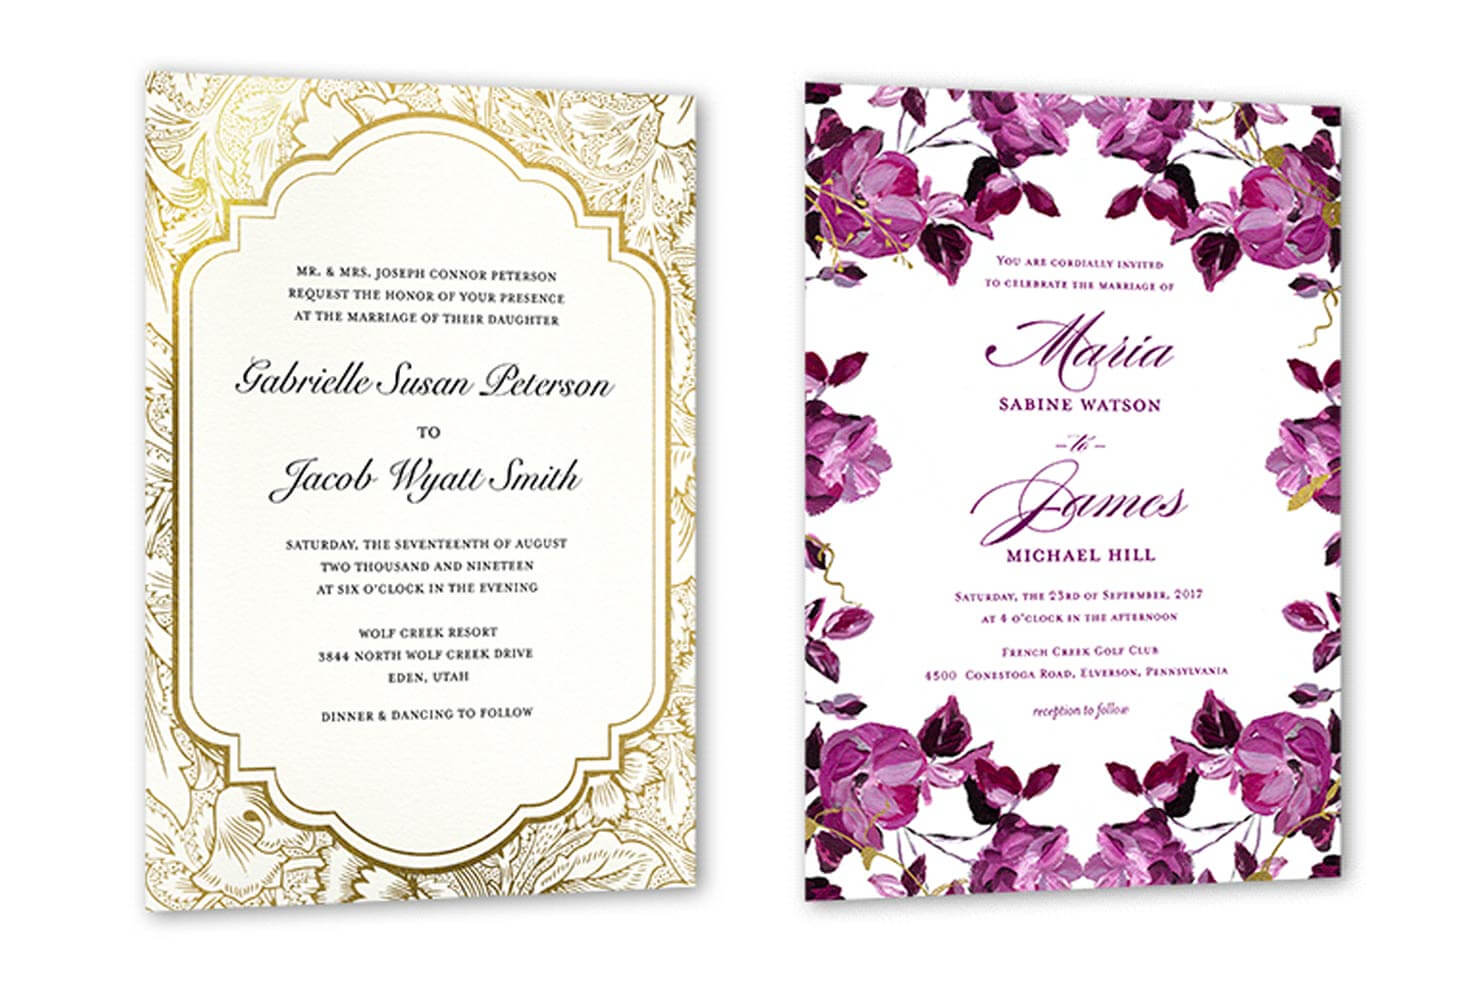 35+ Wedding Invitation Wording Examples 2020 | Shutterfly Within Sample Wedding Invitation Cards Templates